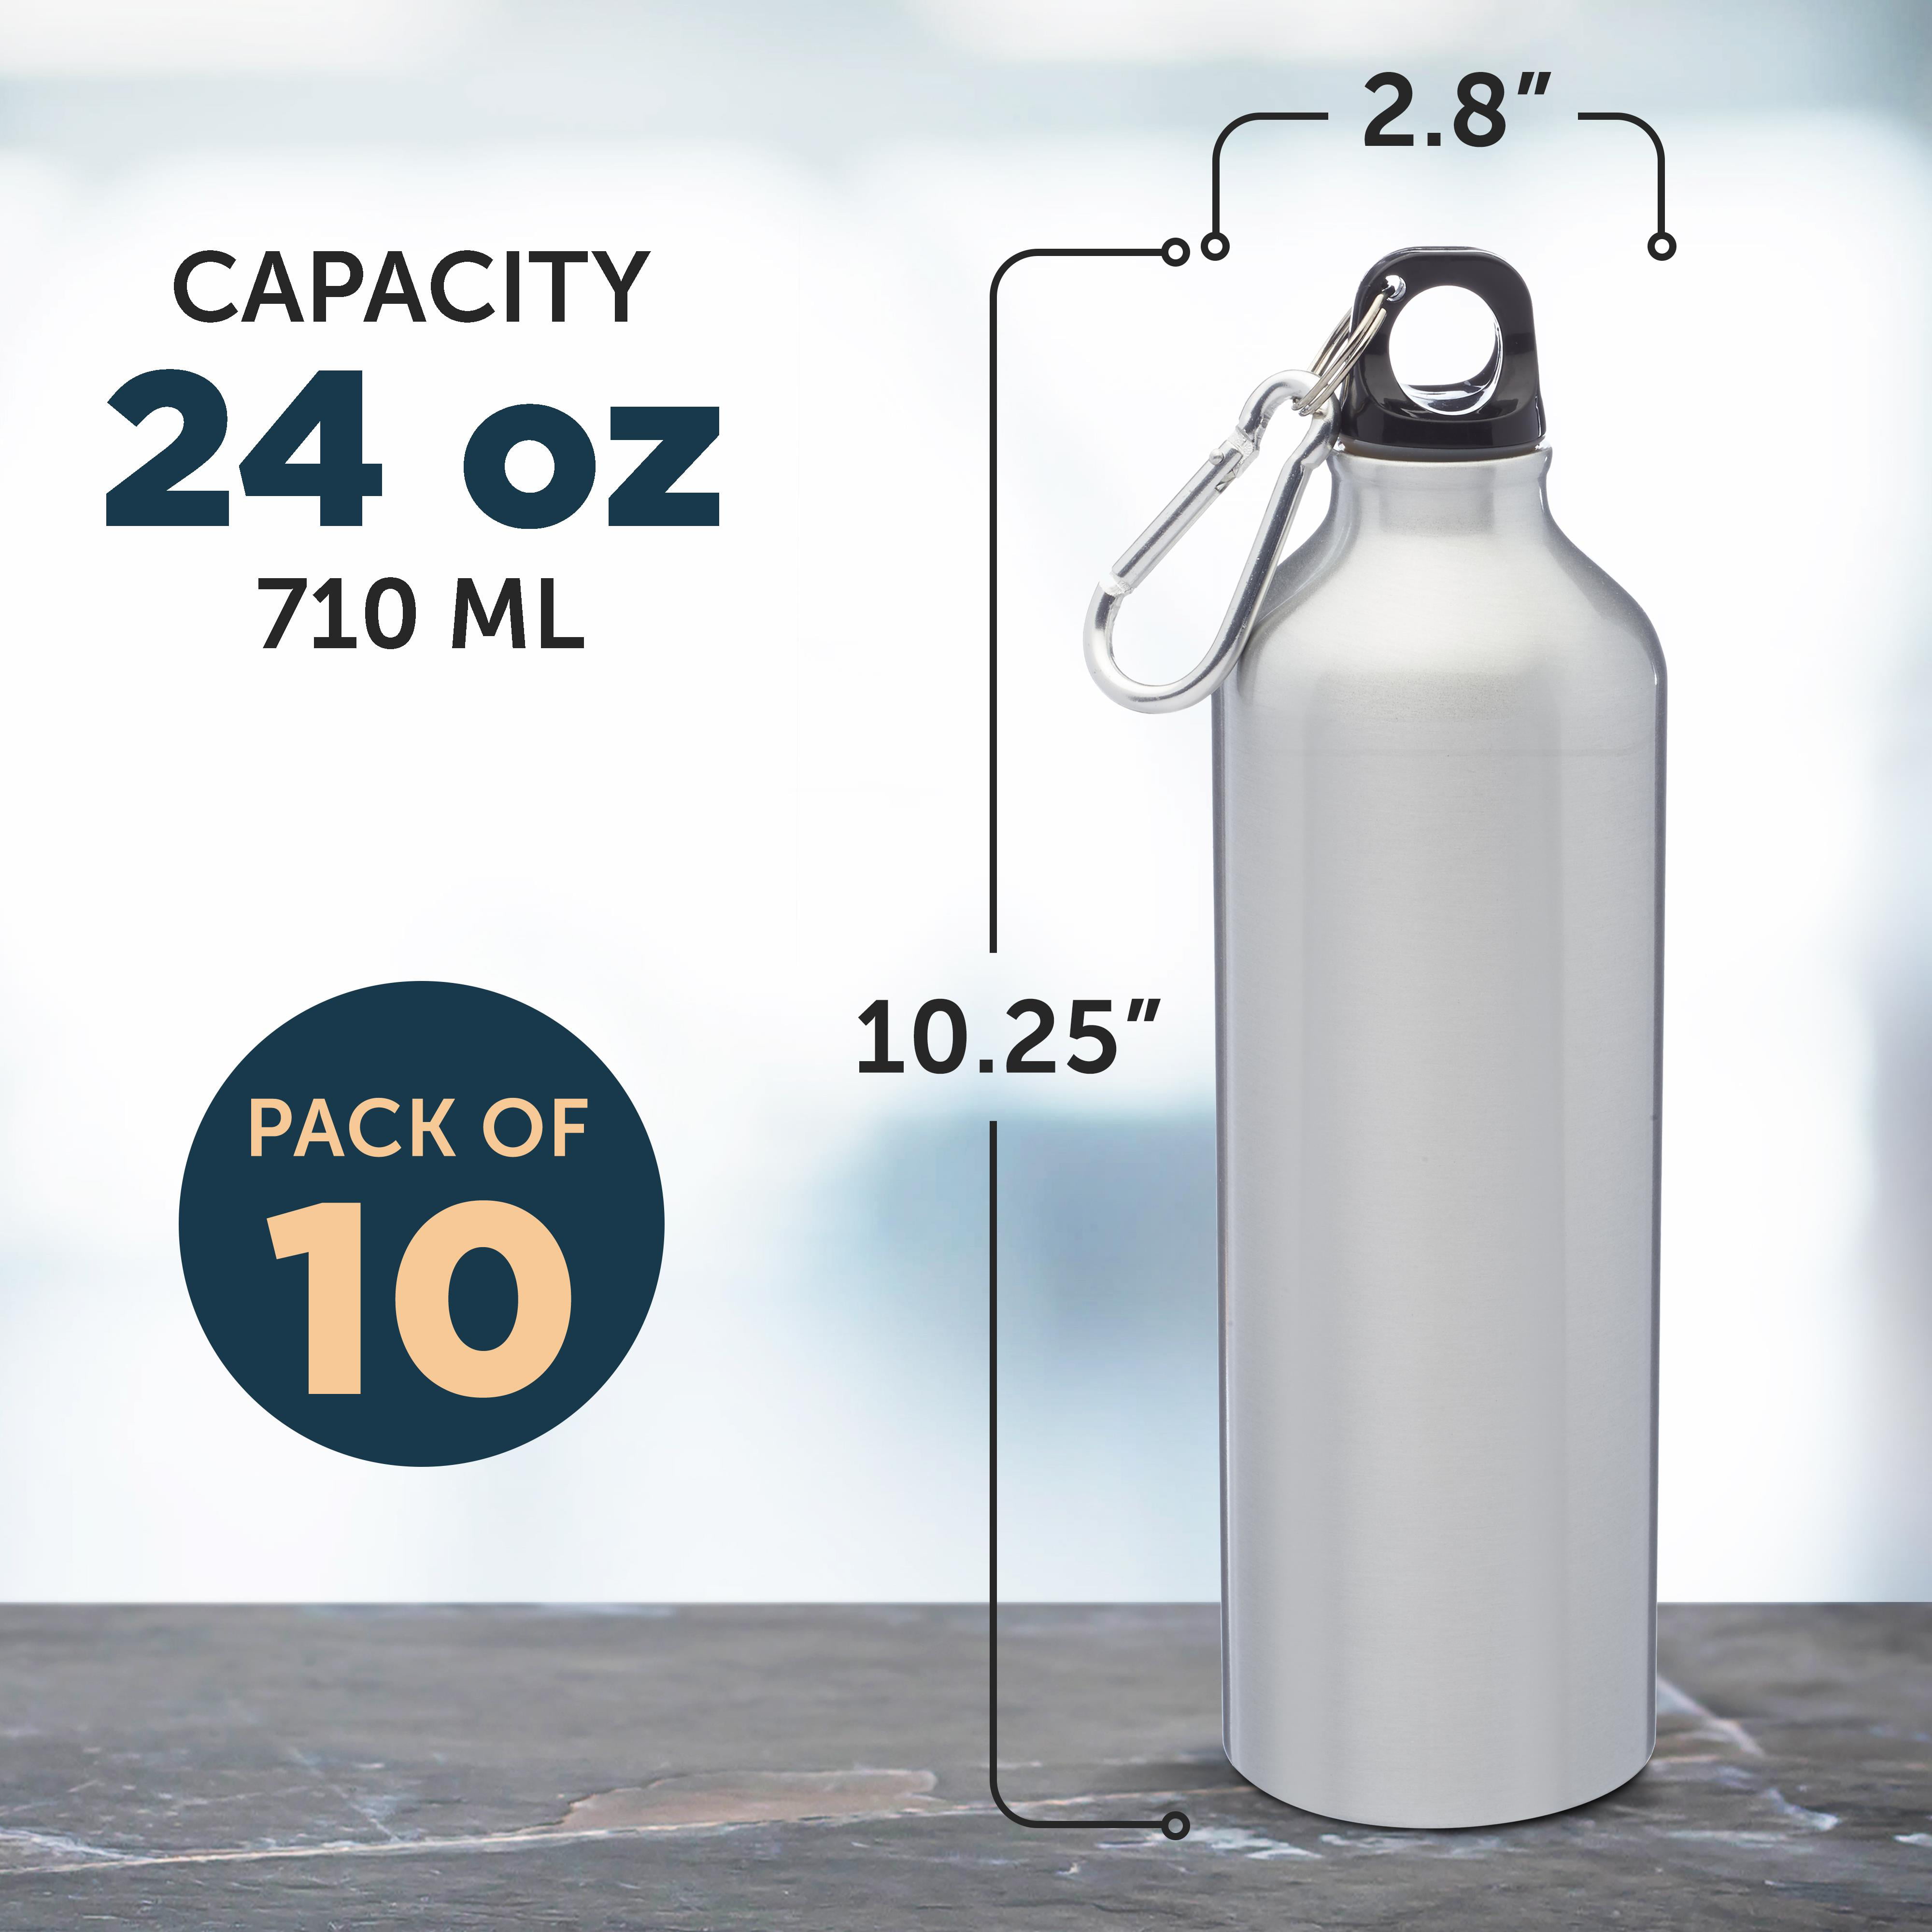 DISCOUNT PROMOS Aluminum Water Bottles 20 oz. Set of 10, Bulk Pack -  Perfect for Gym, Hiking, and Any Indoor/Outdoor Activities - White в 2023 г